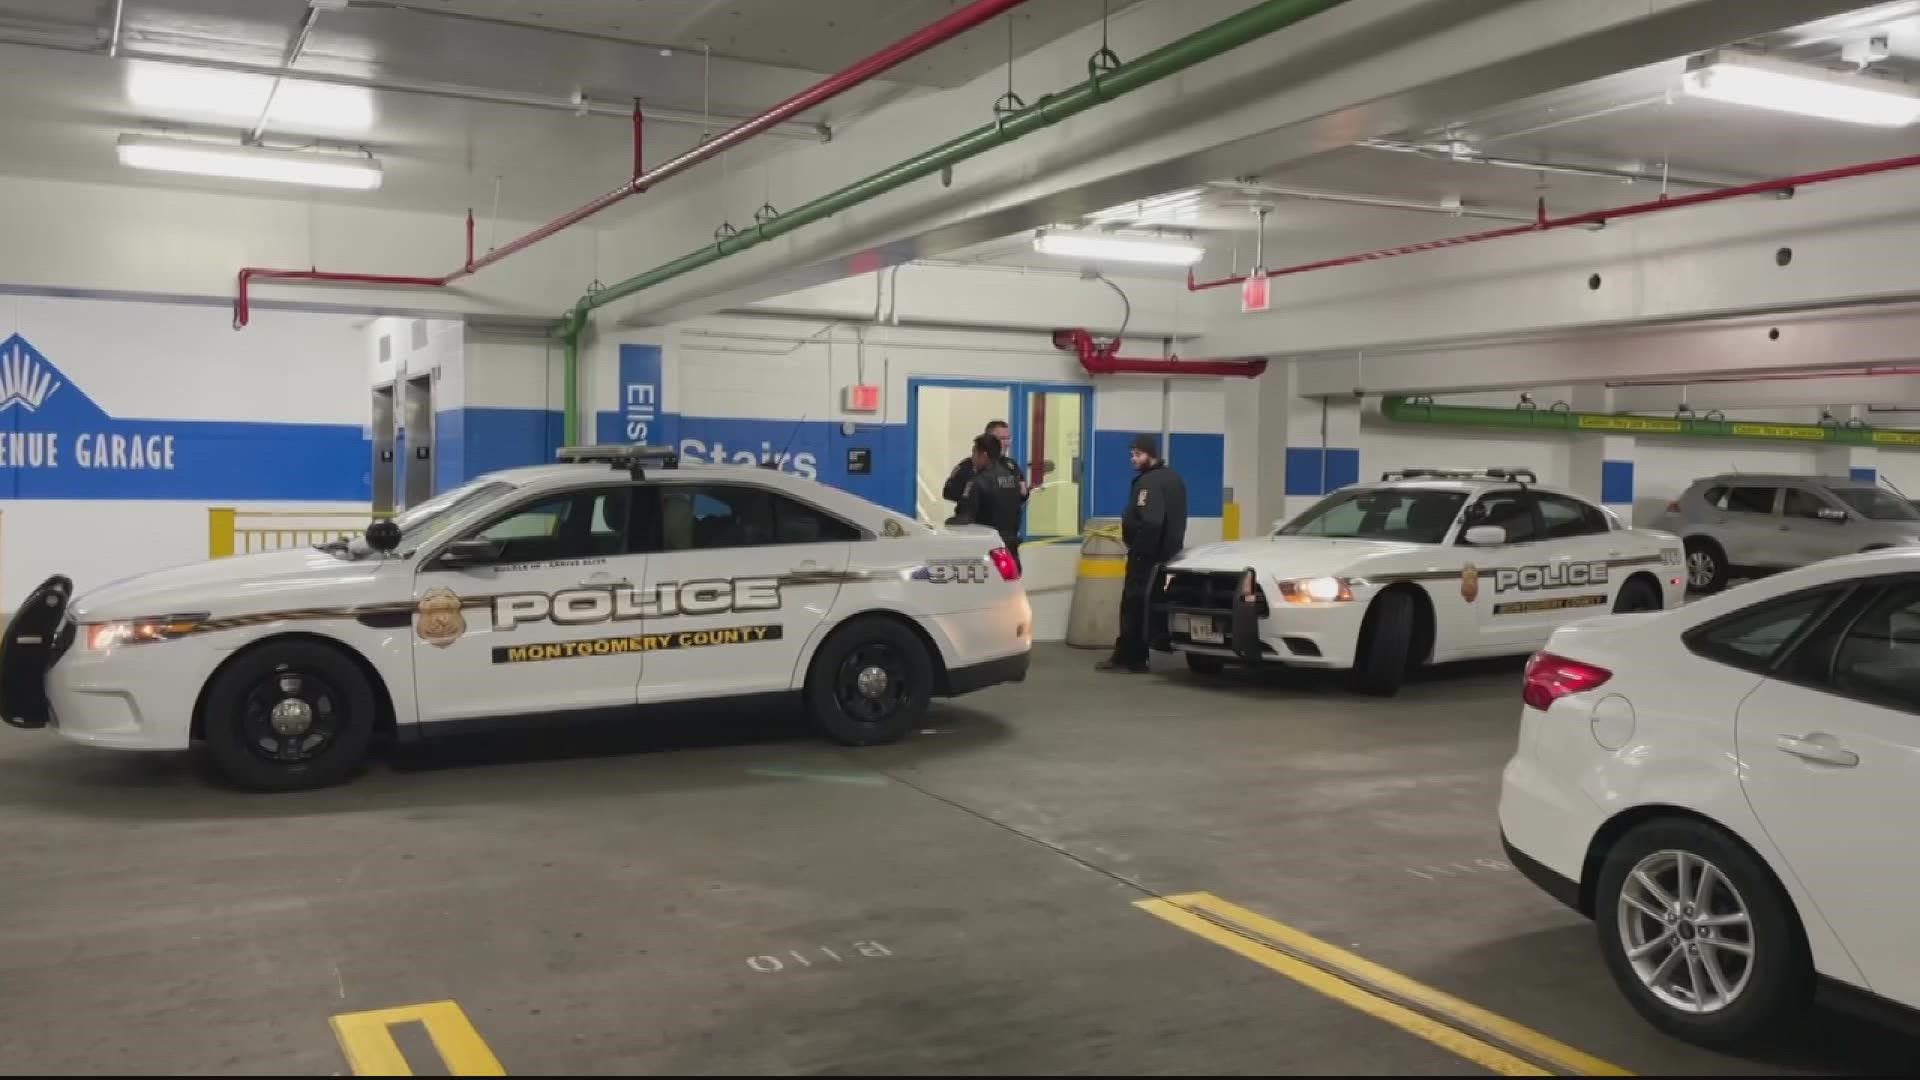 Police are still investigating after a 62-year-old man was found shot to death in a Silver Spring parking garage Wednesday night.